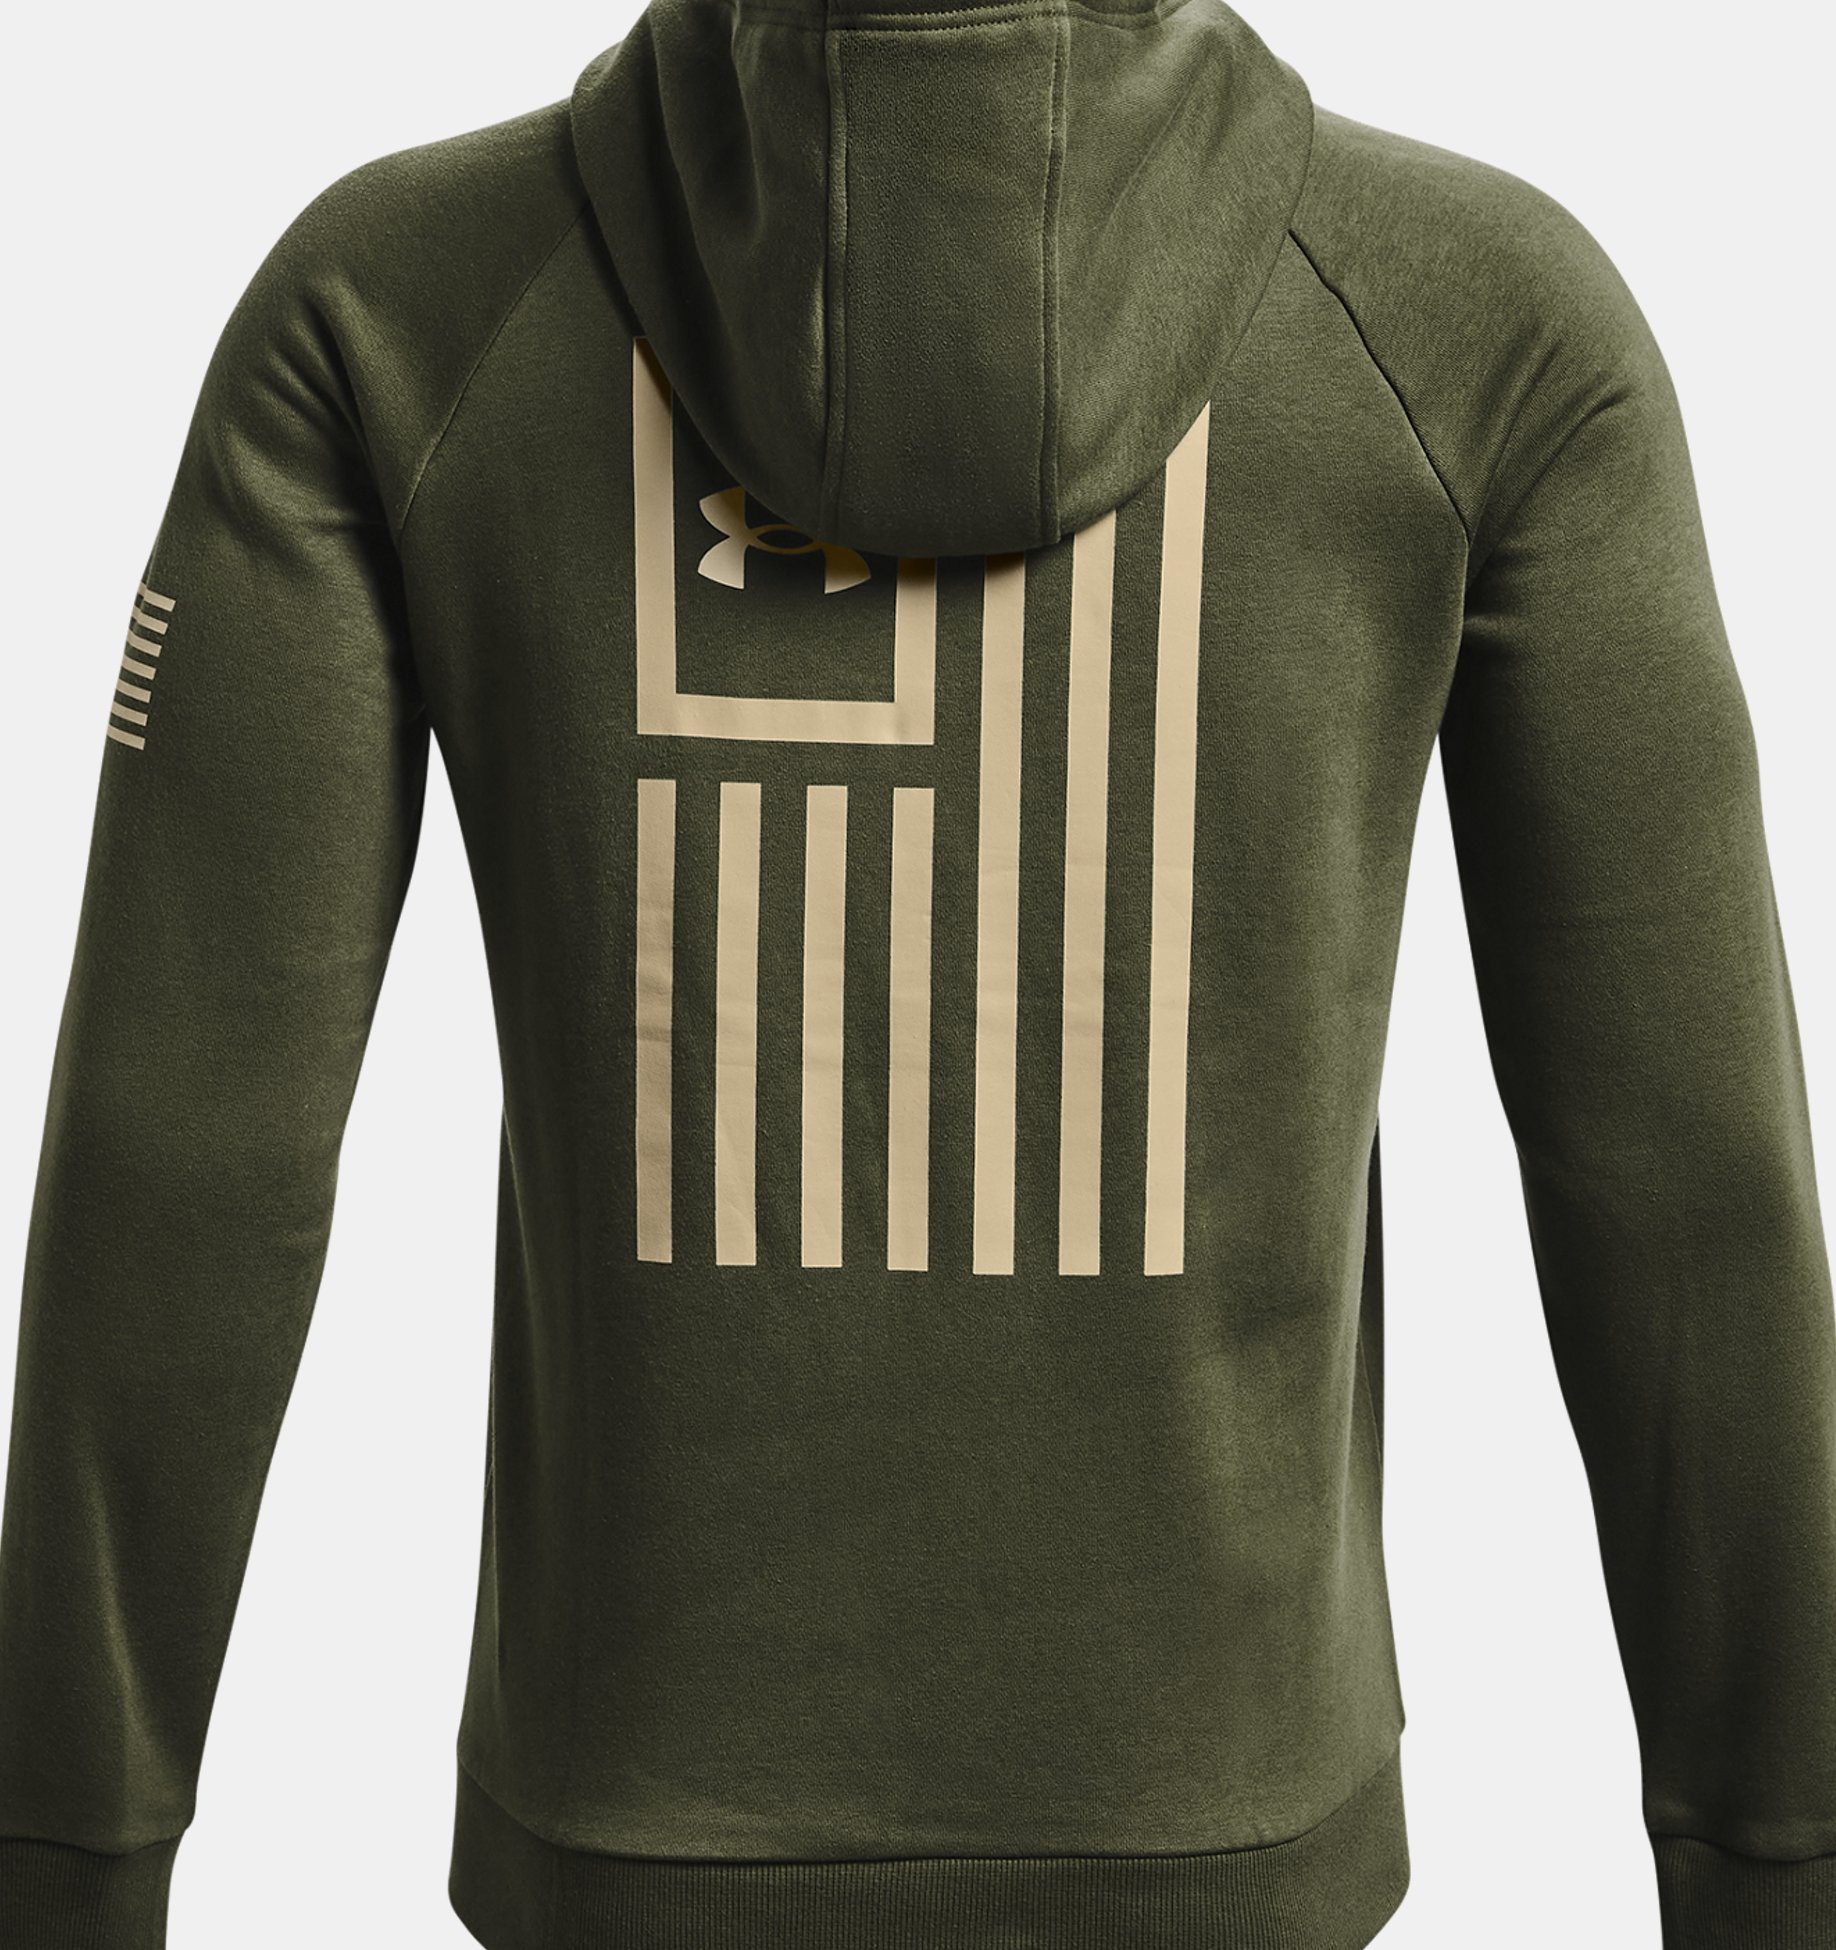 Under Armour Men's New Freedom Flag Hoodie 